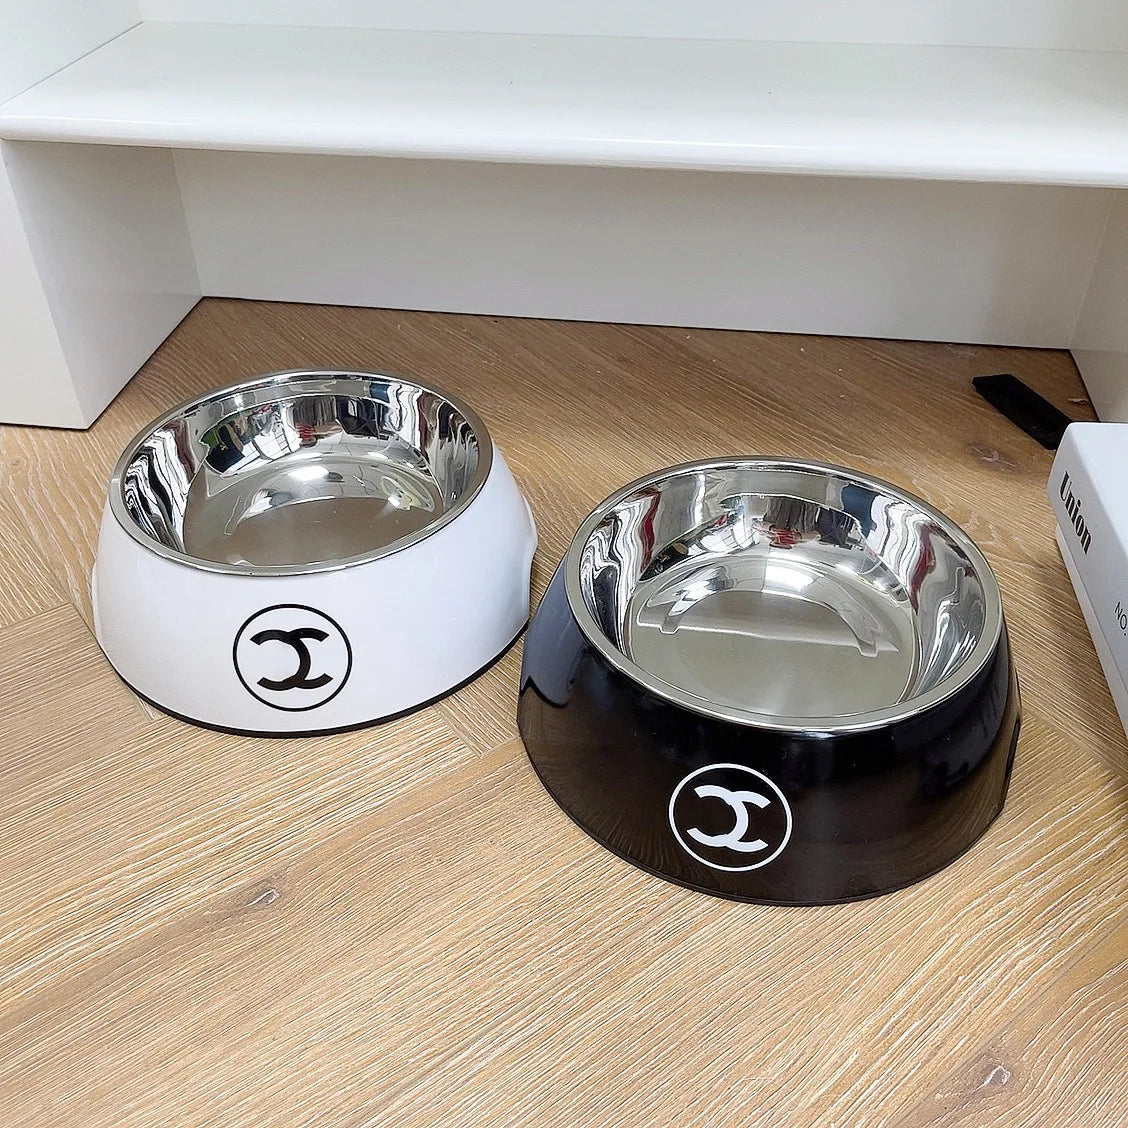 Luxury Brand Designer Dog Bowl Stainless Steel Material Placement Mat, Dog and Cat Feeder Anti Slip Collision Pet Supplies